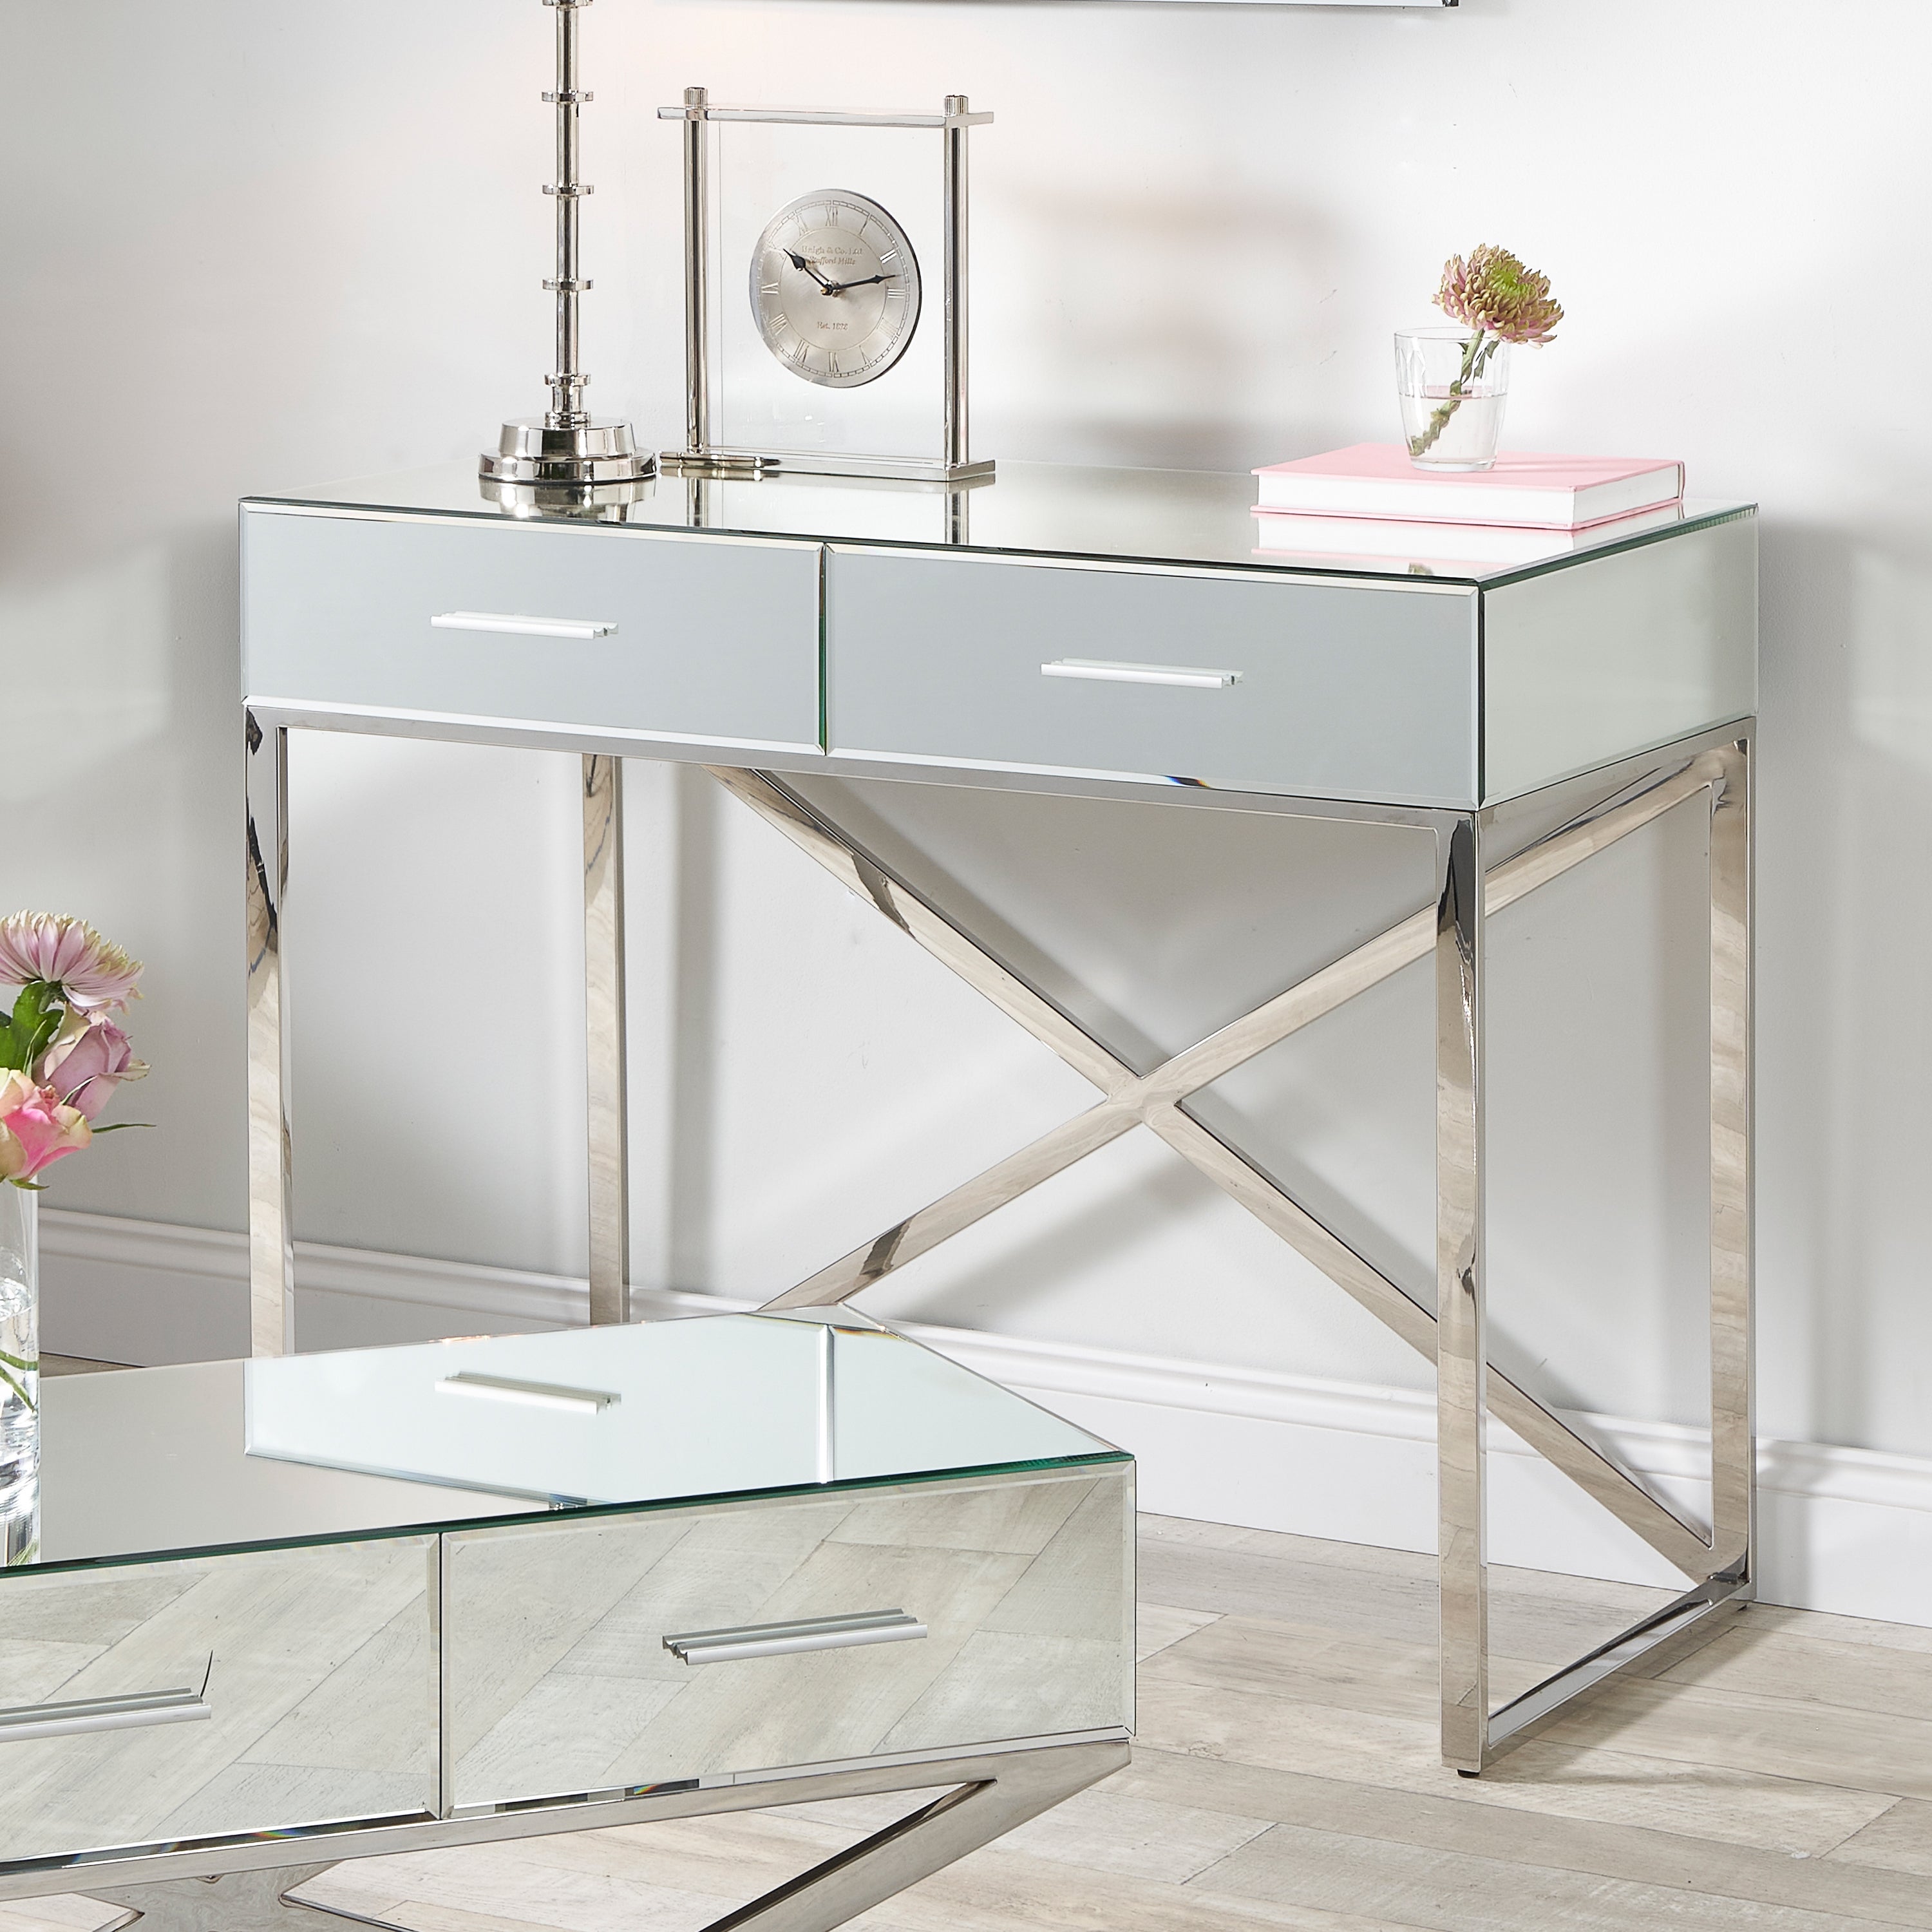 Pacific Rocco 2 Drawer Dressing Table Mirrored Silver